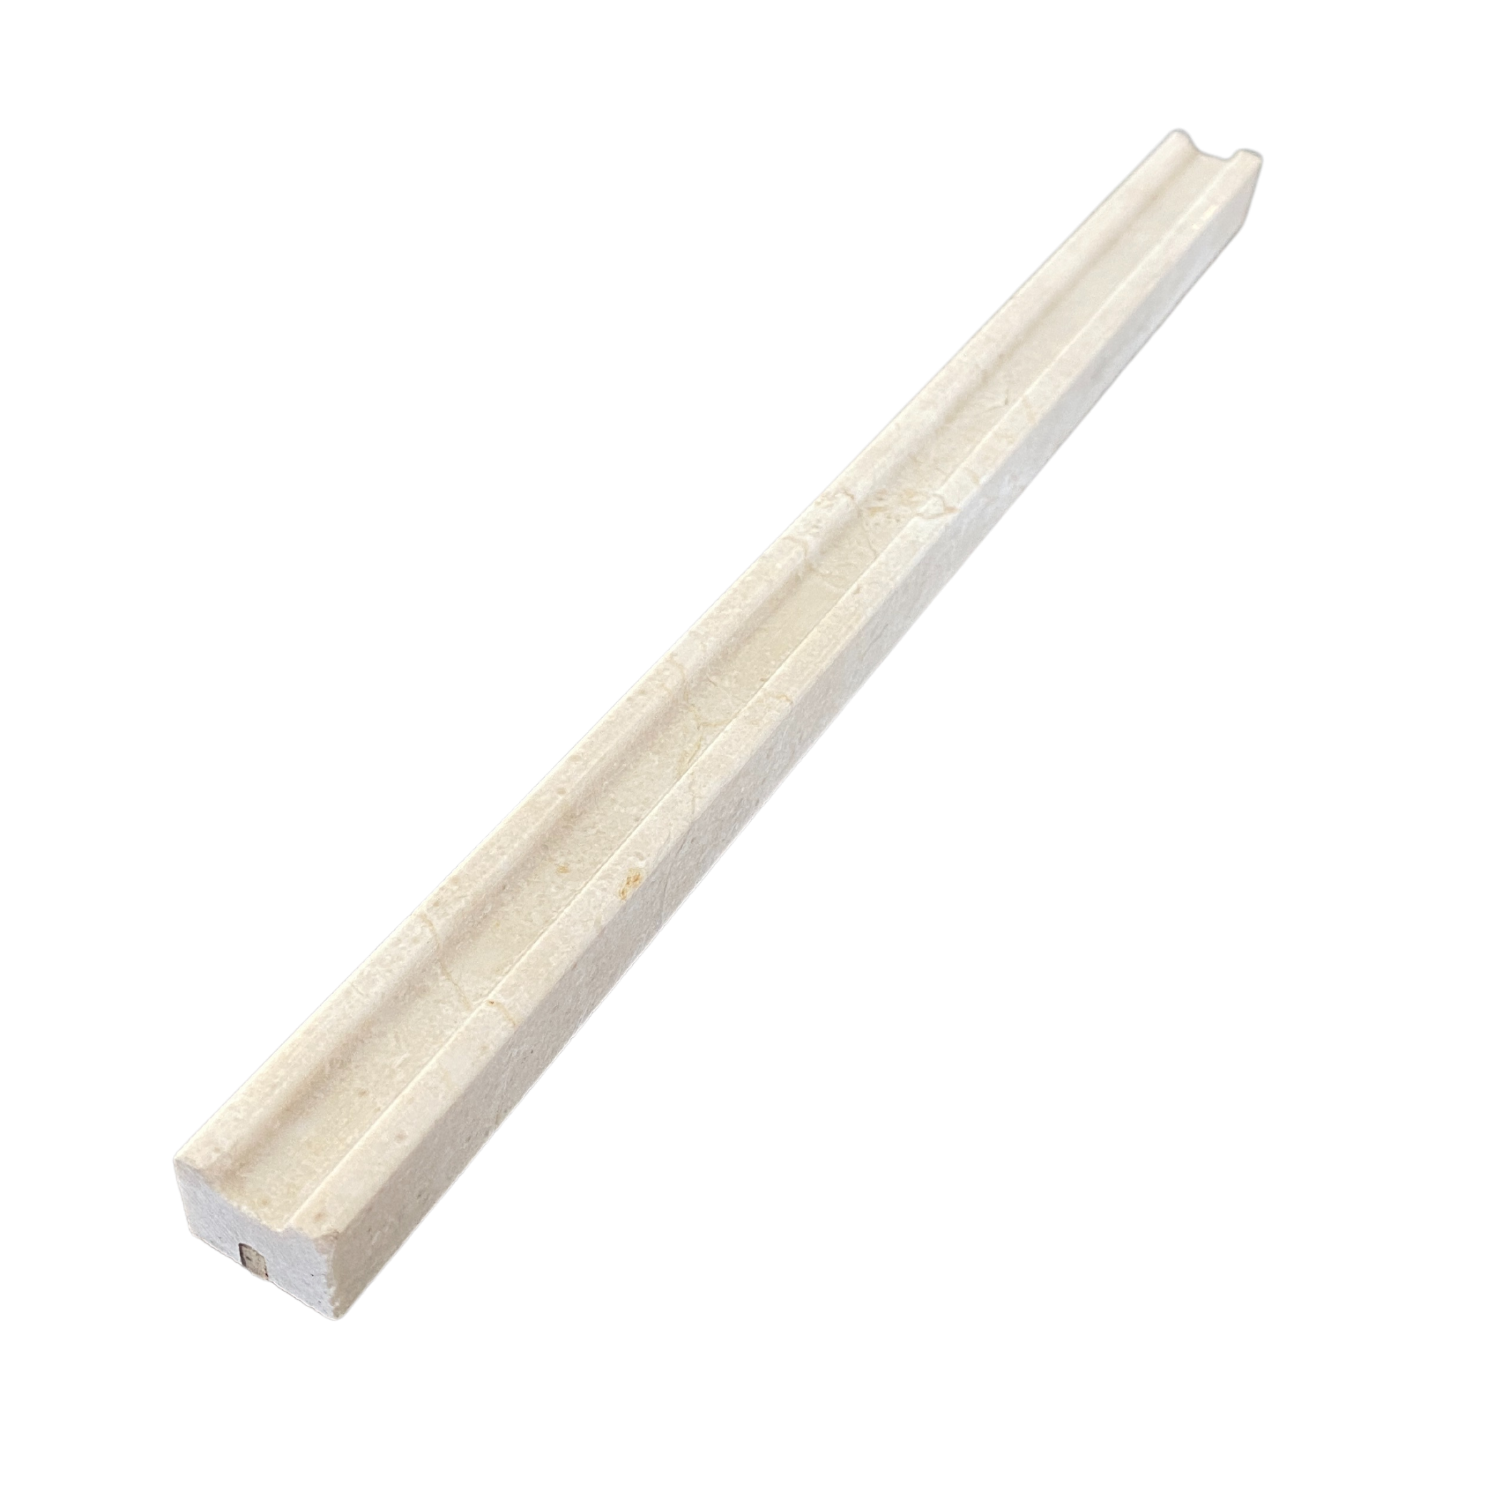 Crema Marfil polished Penna Pencil Molding Trim| Beige Marble Pencil Molding| Crema Marfil Trim Piece| Beige Marble Trim| Crema Marfil Finishing piece| Marble Liner Pencil All Marble Tiles